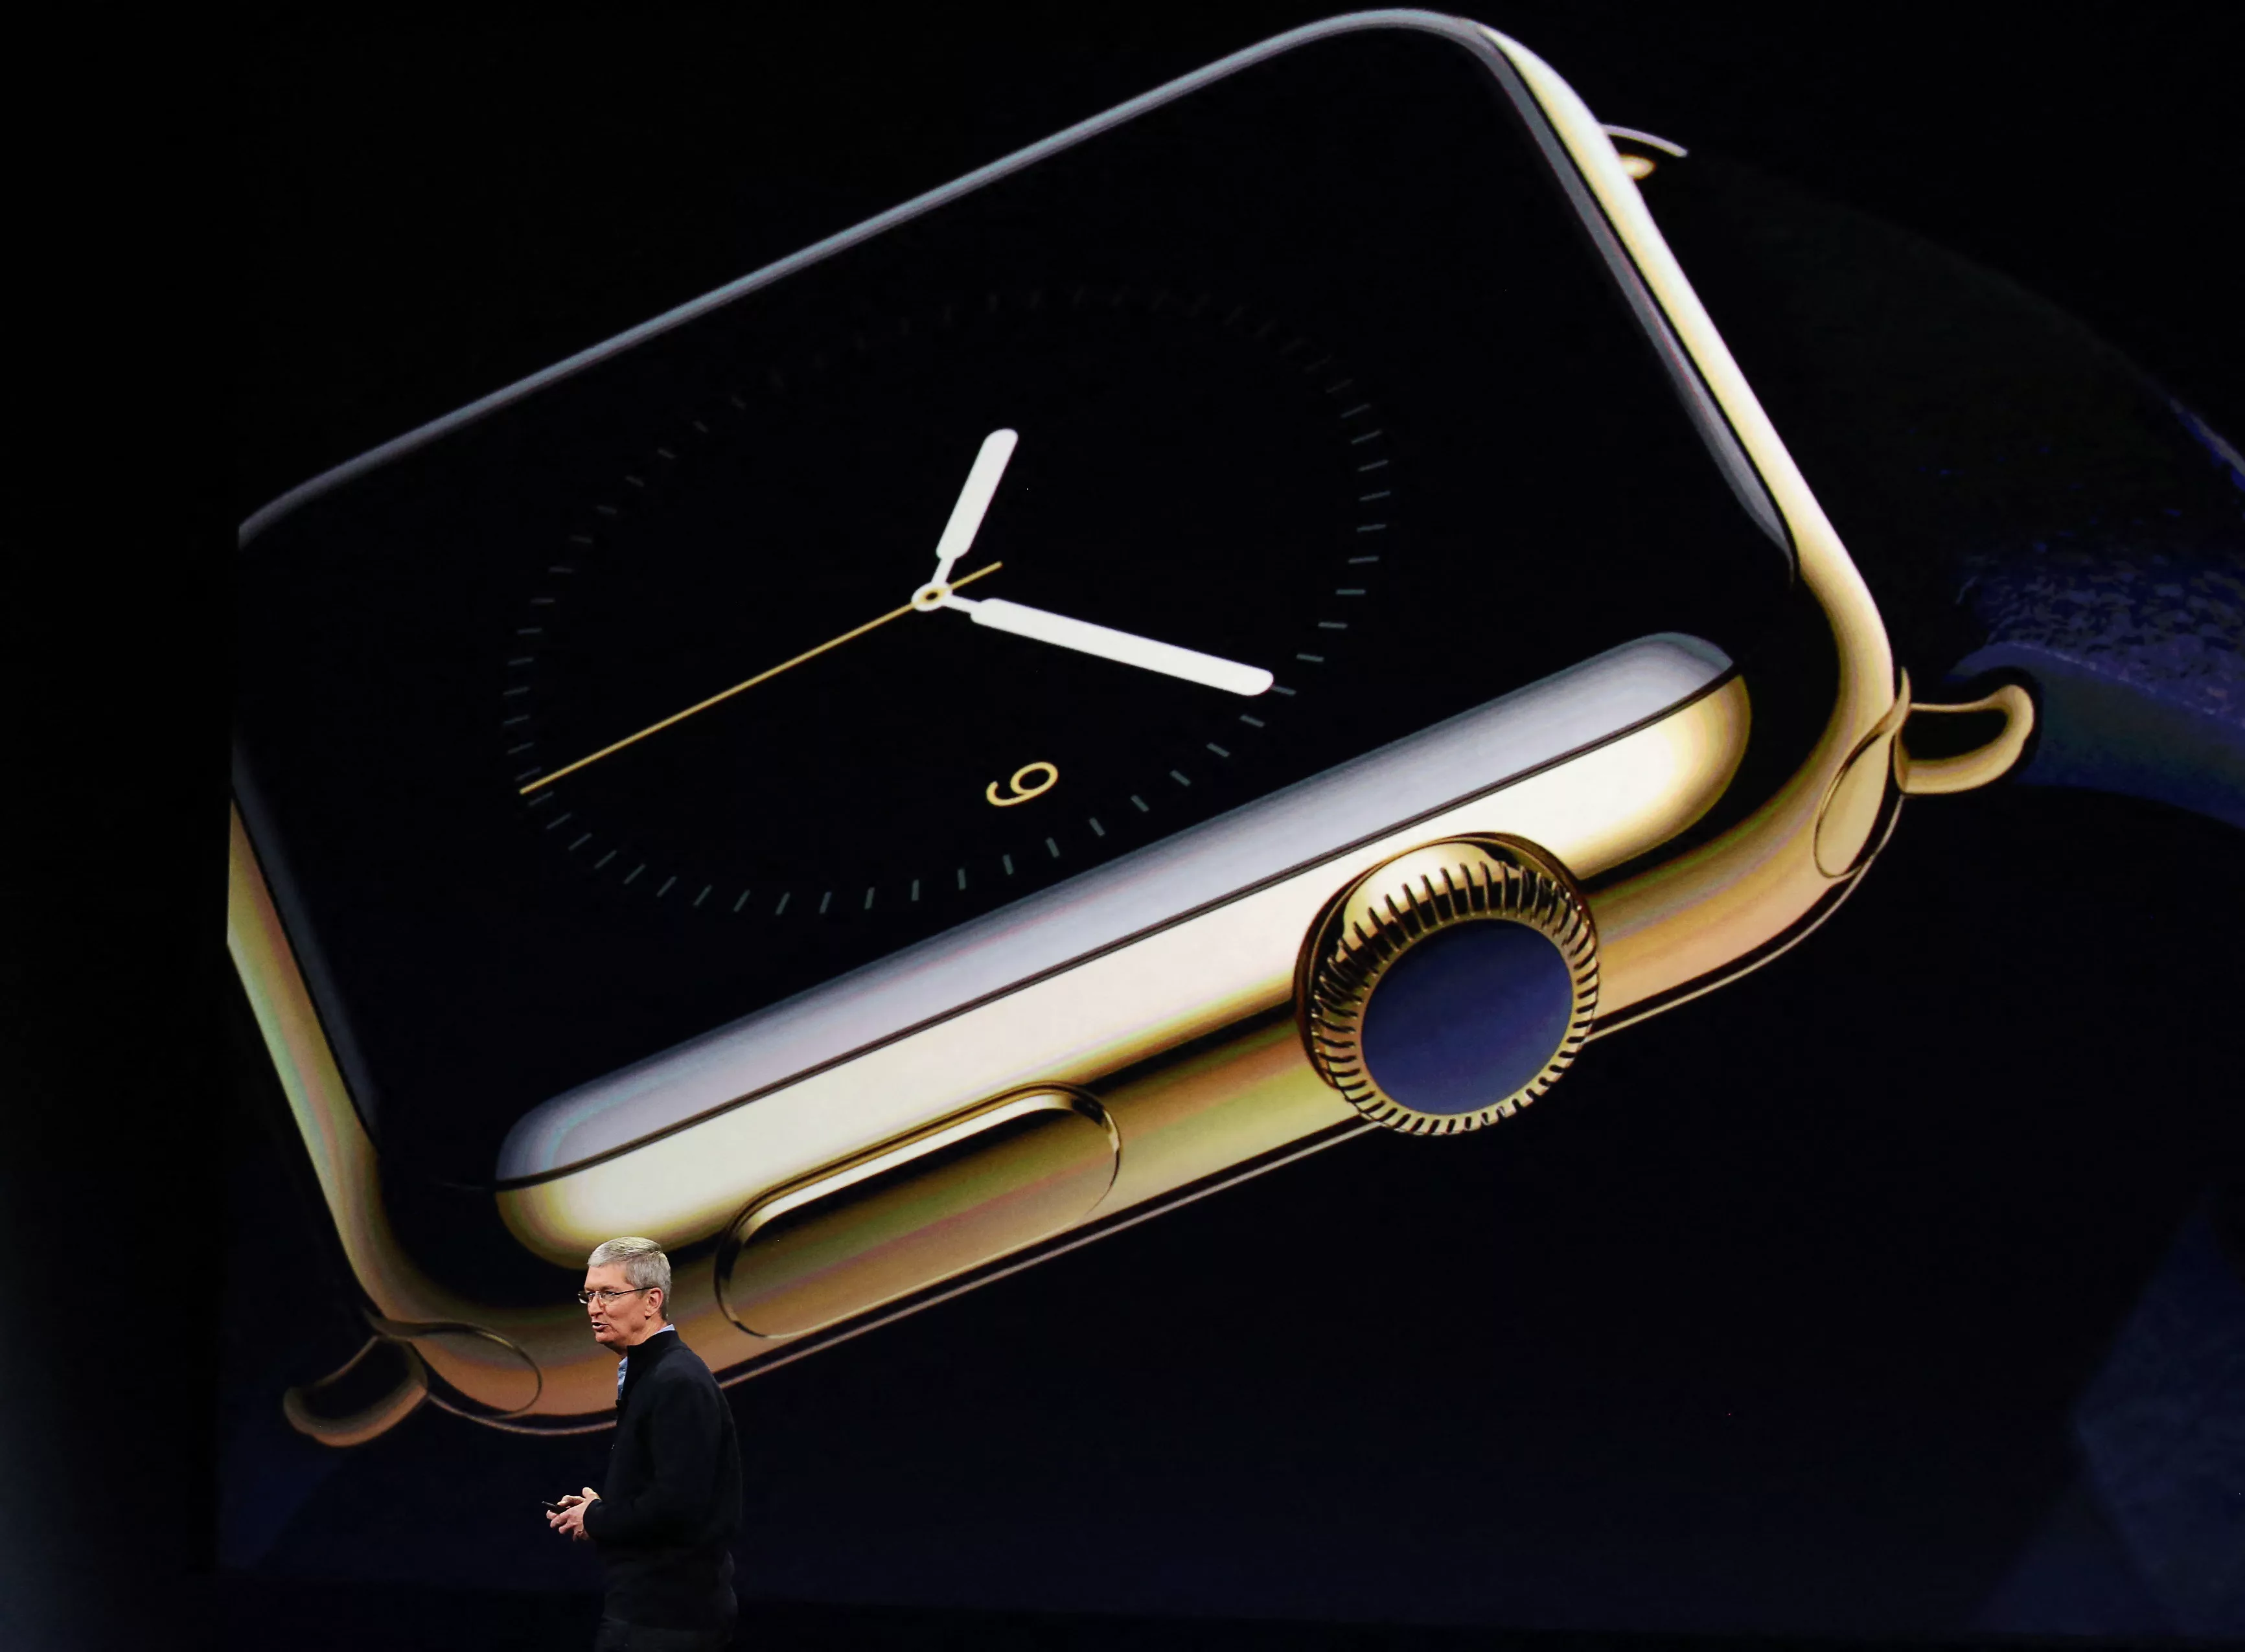 apple-ceo-tim-cook-introduces-the-apple-watch-during-an-apple-event-in-san-francisco